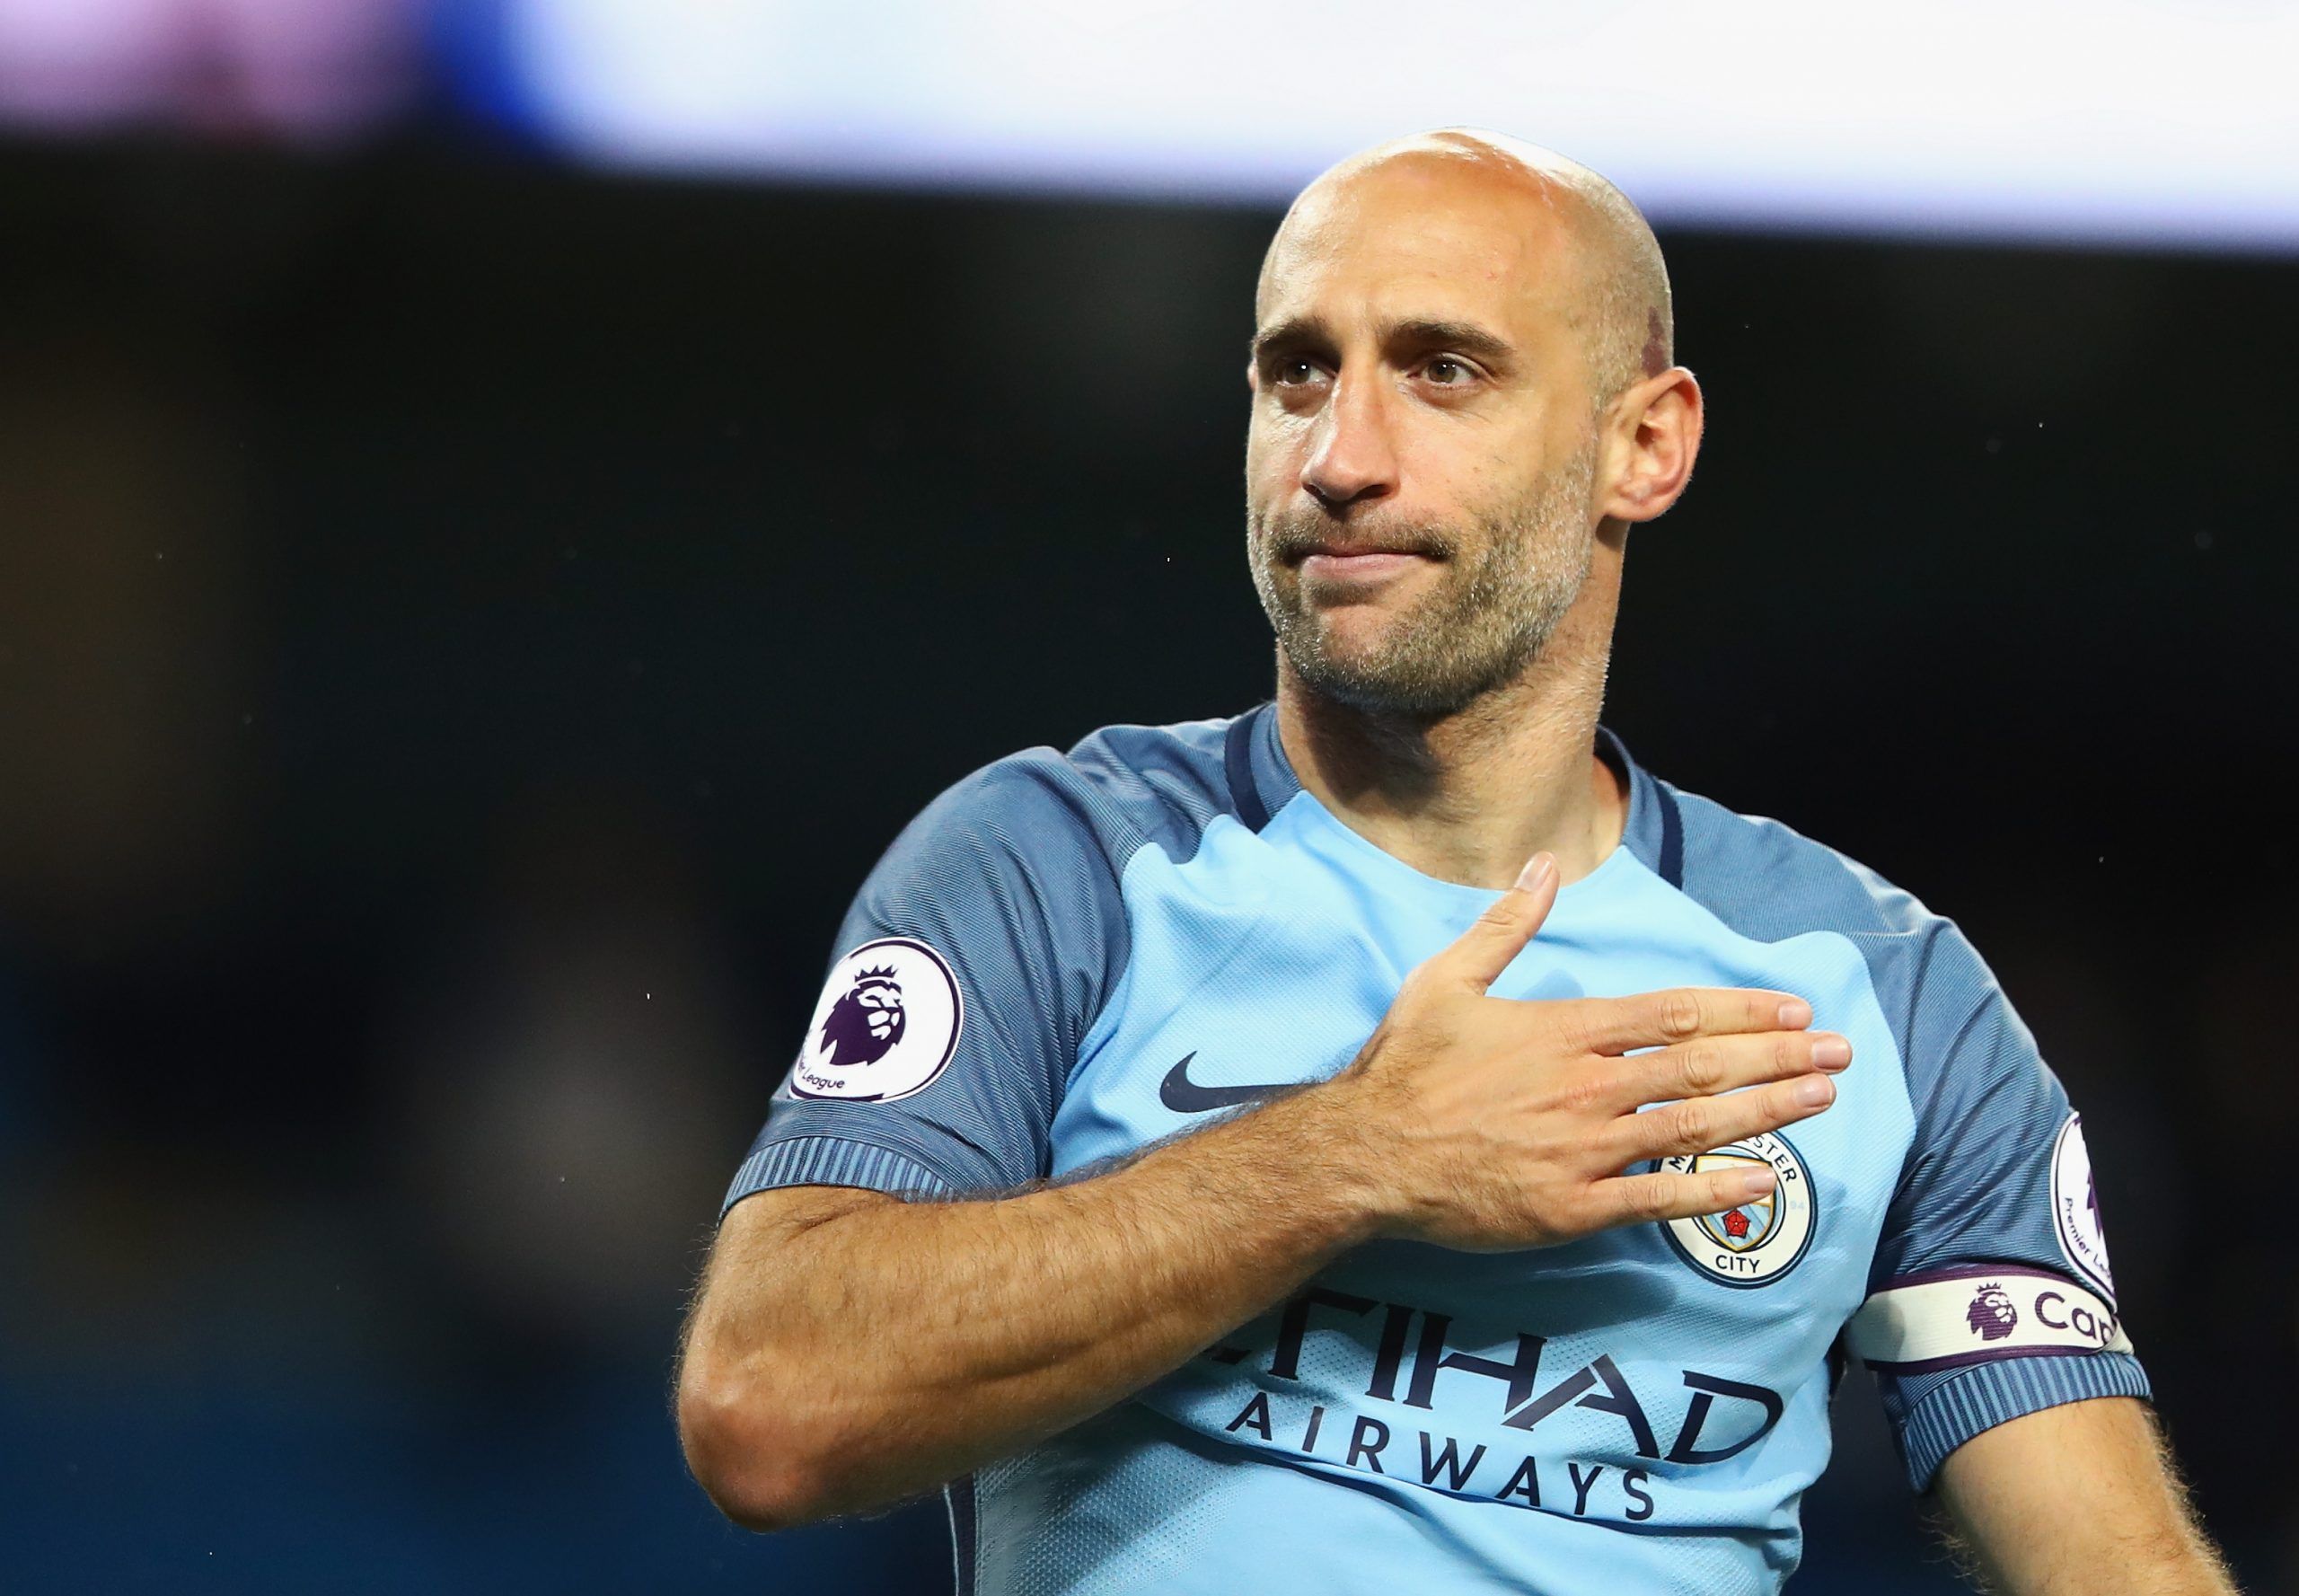 MANCHESTER, ENGLAND - MAY 16: Pablo Zabaleta of Manchester City shows appreciation to the fans after the Premier League match between Manchester City and West Bromwich Albion at Etihad Stadium on May 16, 2017 in Manchester, England. (Photo by Clive Mason/Getty Images)